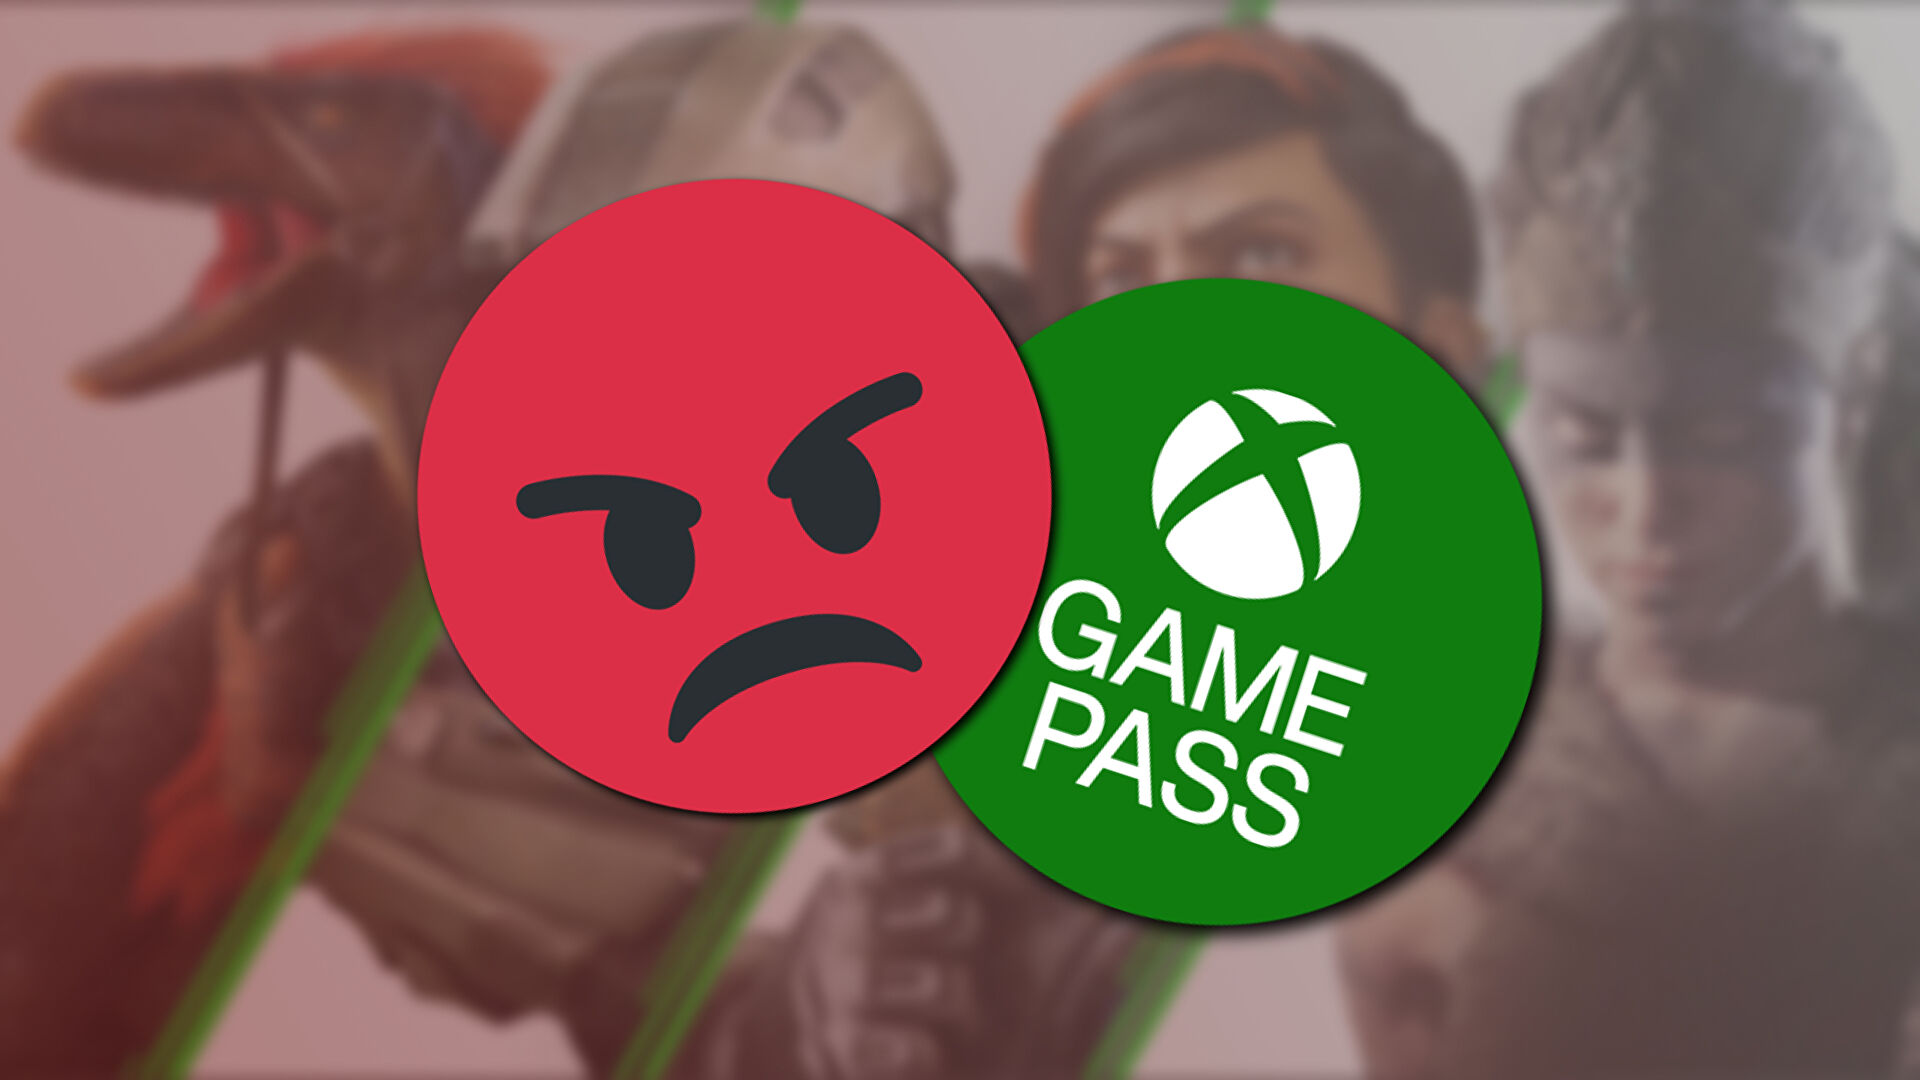 Next week’s big Xbox Box Game Pass game will be detested